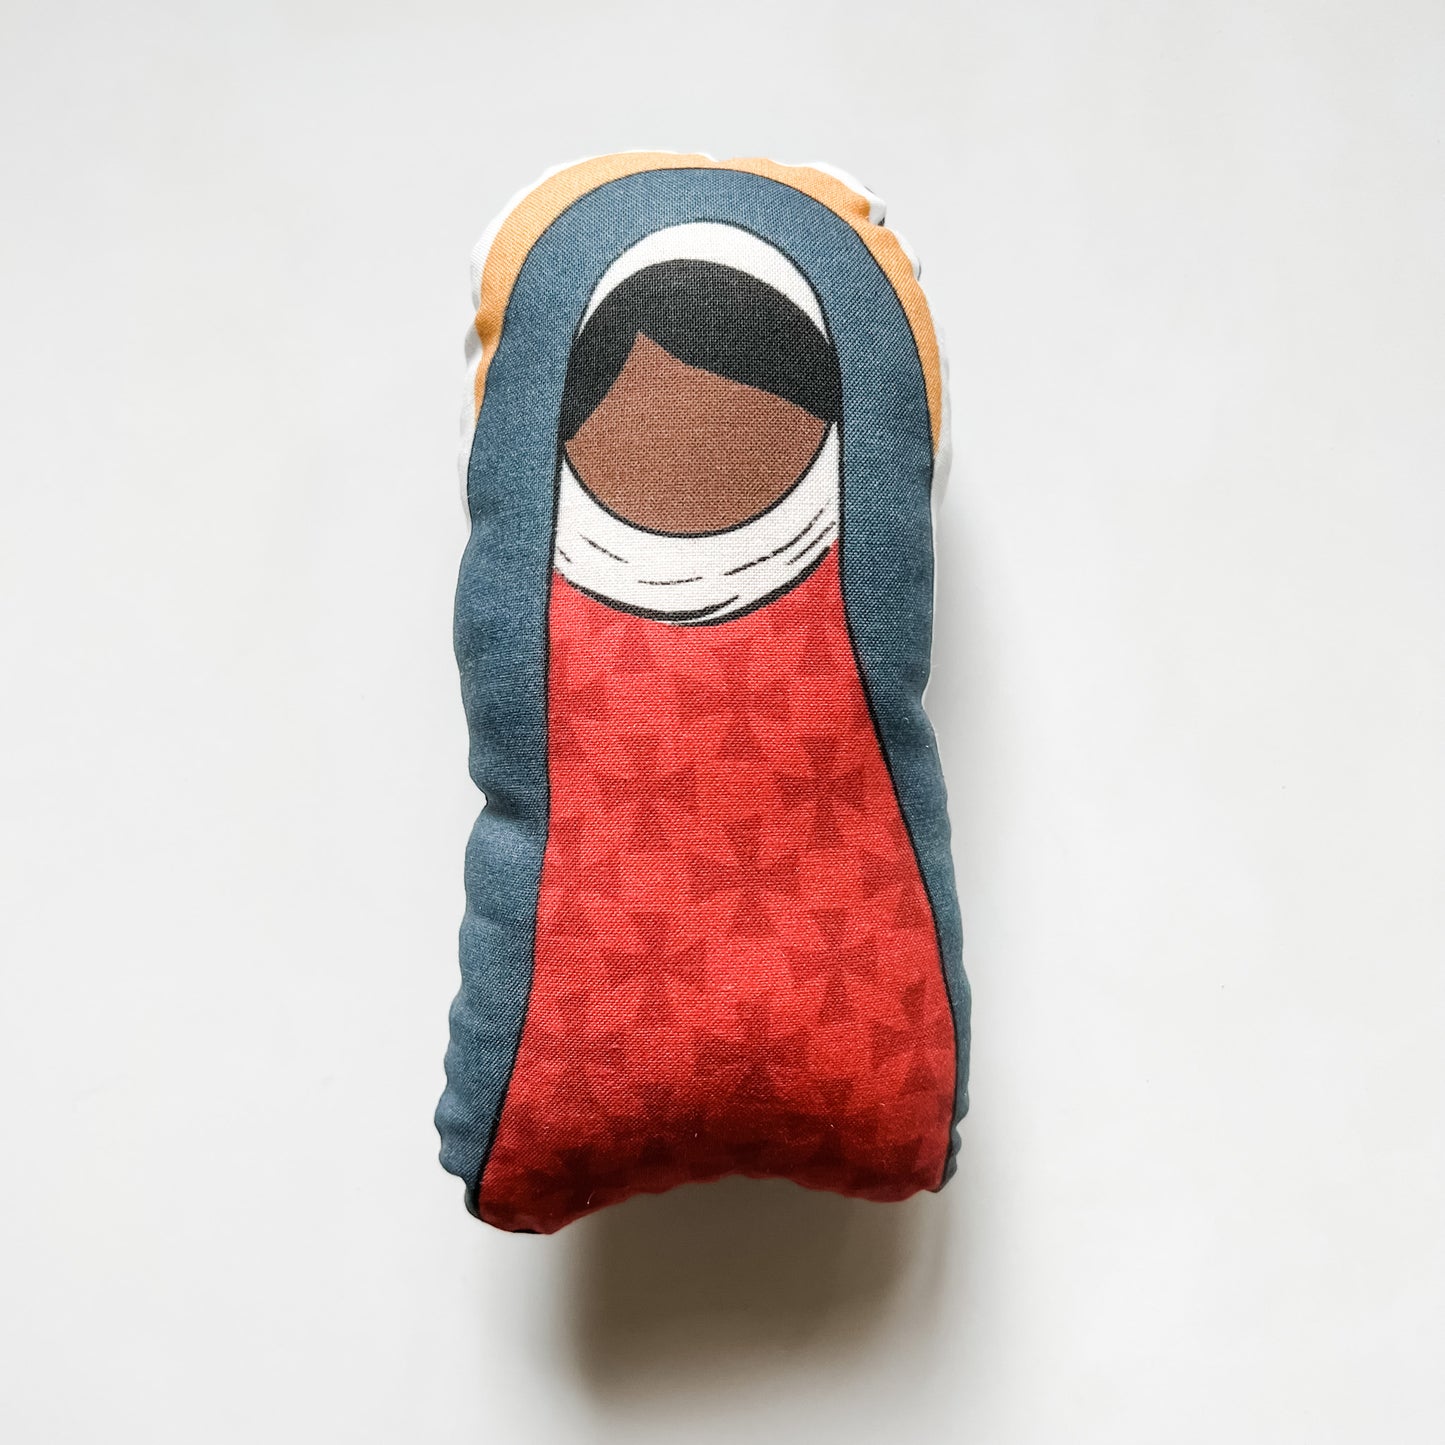 Collectible Saint Squishies